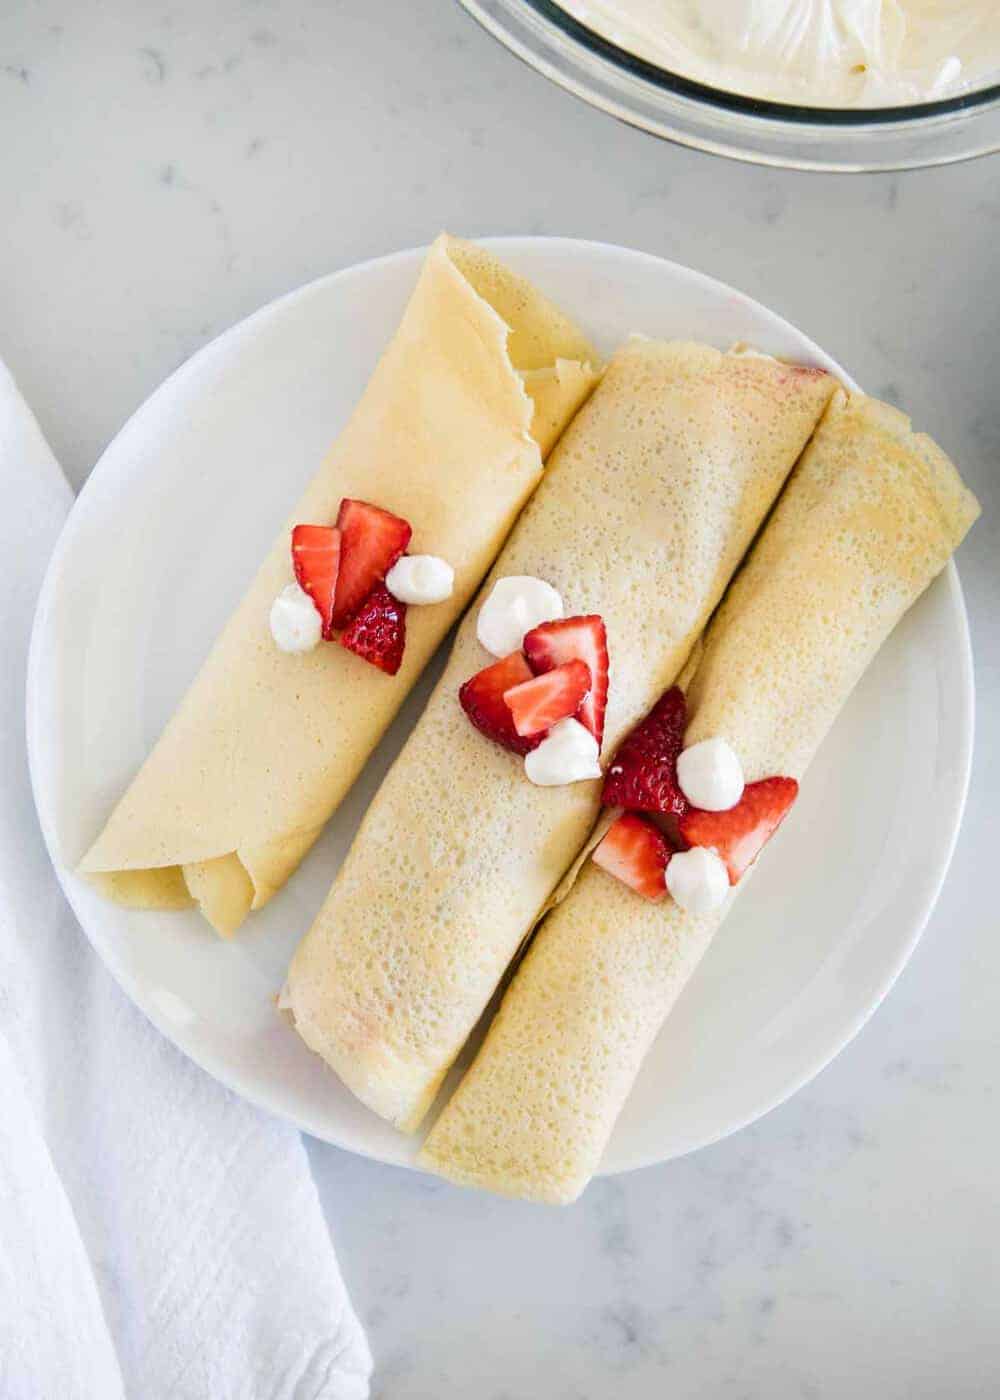 Easy Crepe Recipe With Video I Heart Naptime